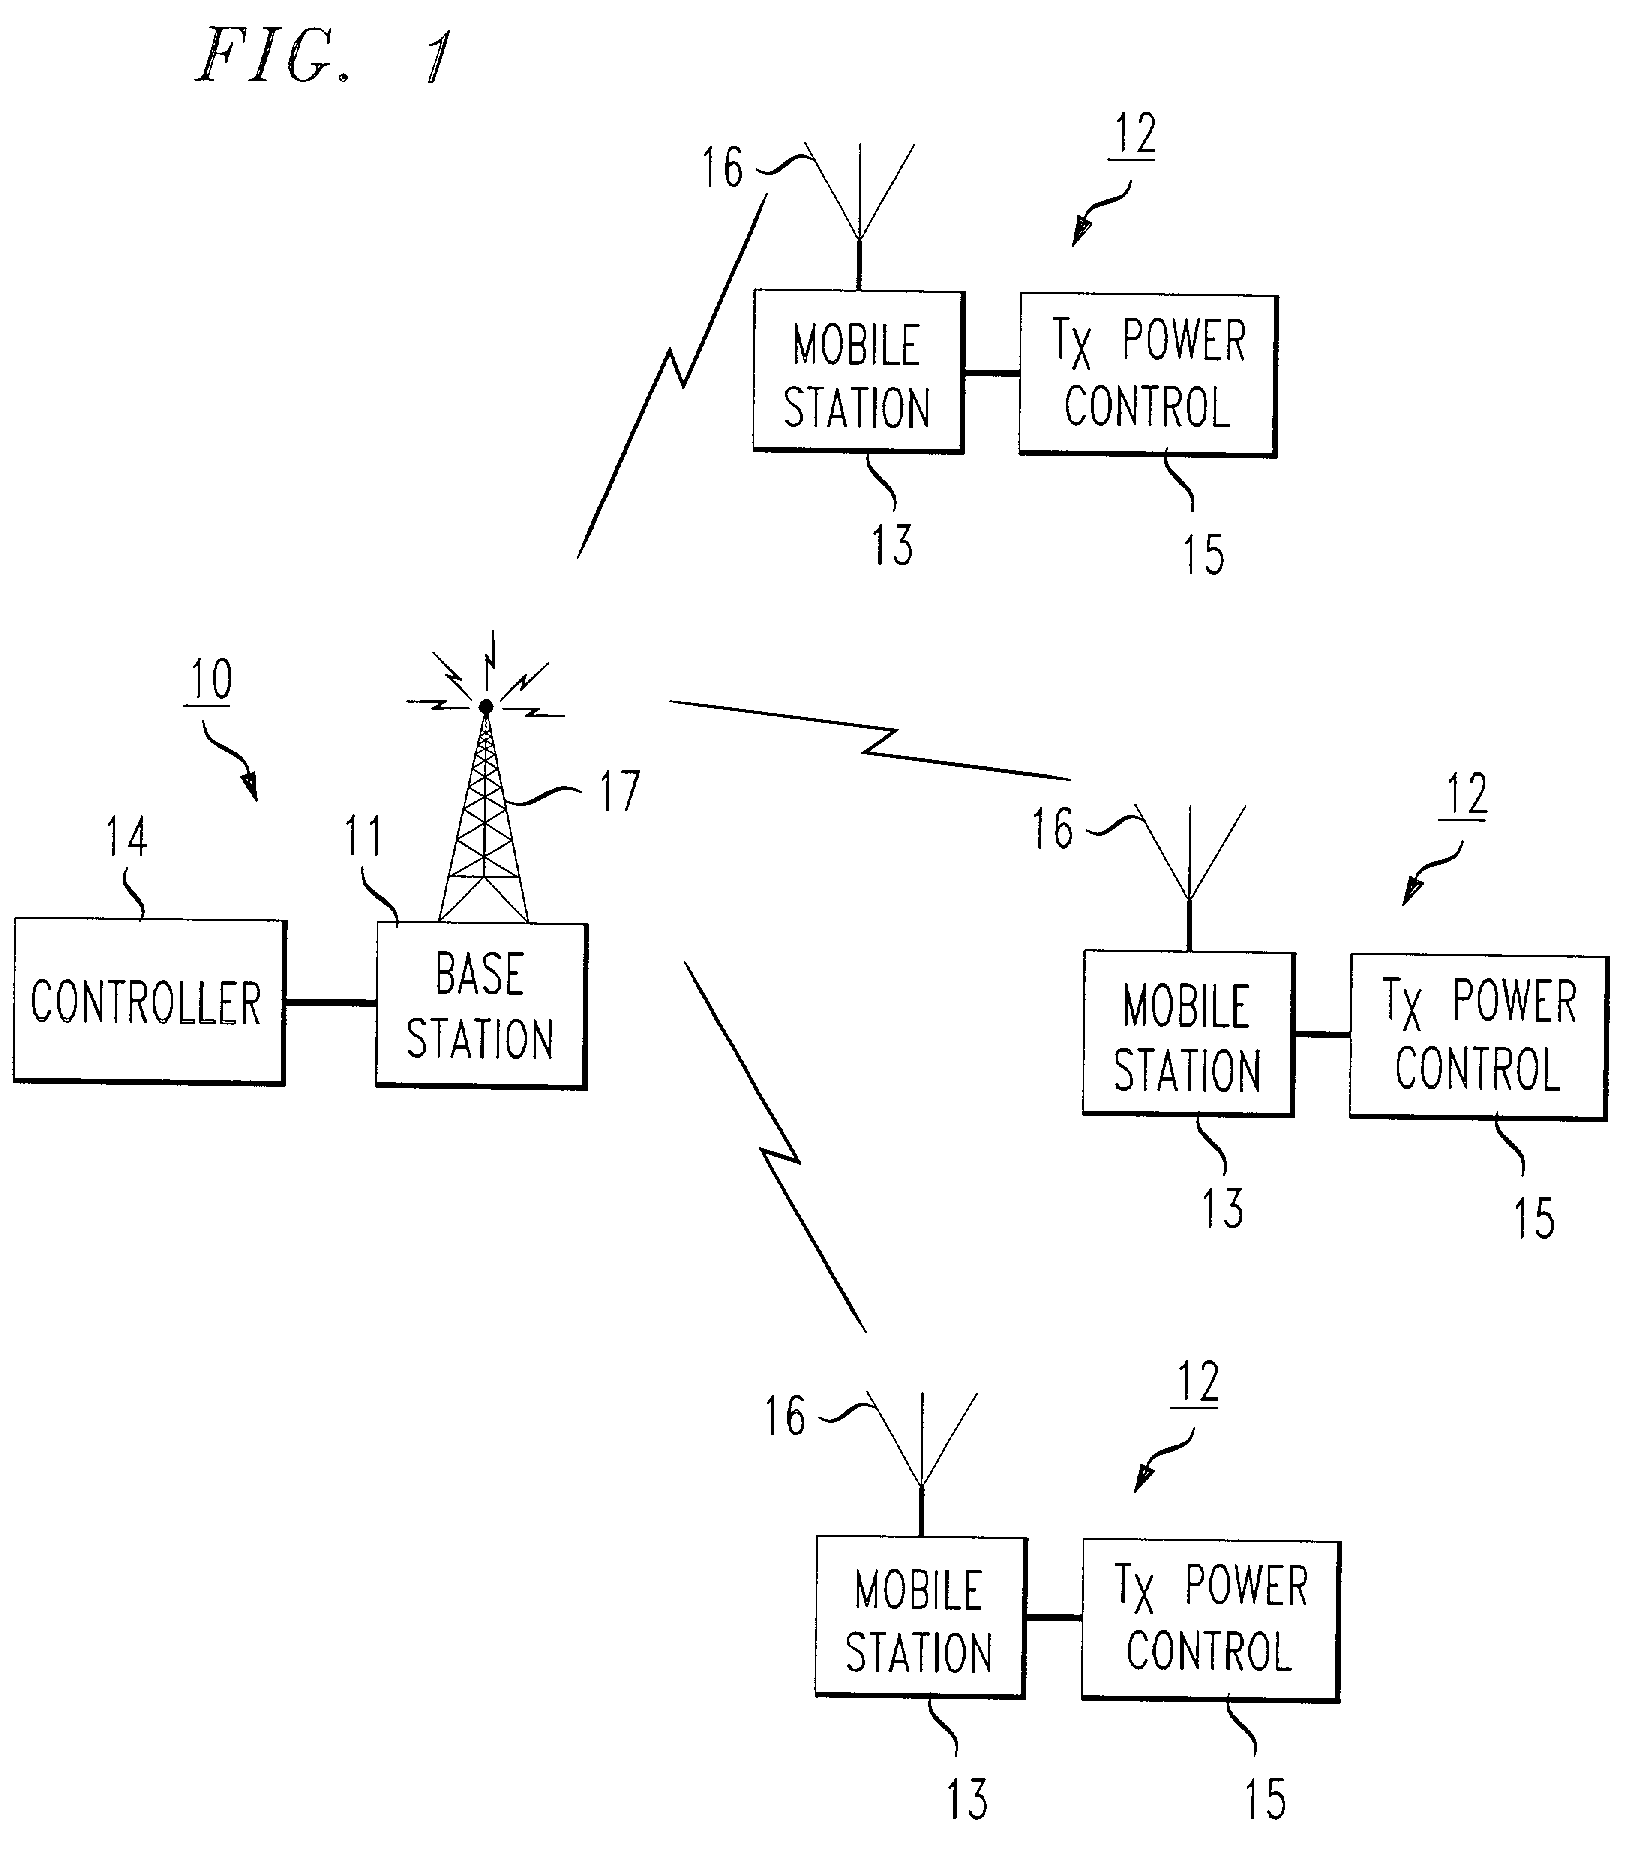 Transmit power control for an OFDM-based wireless communication system